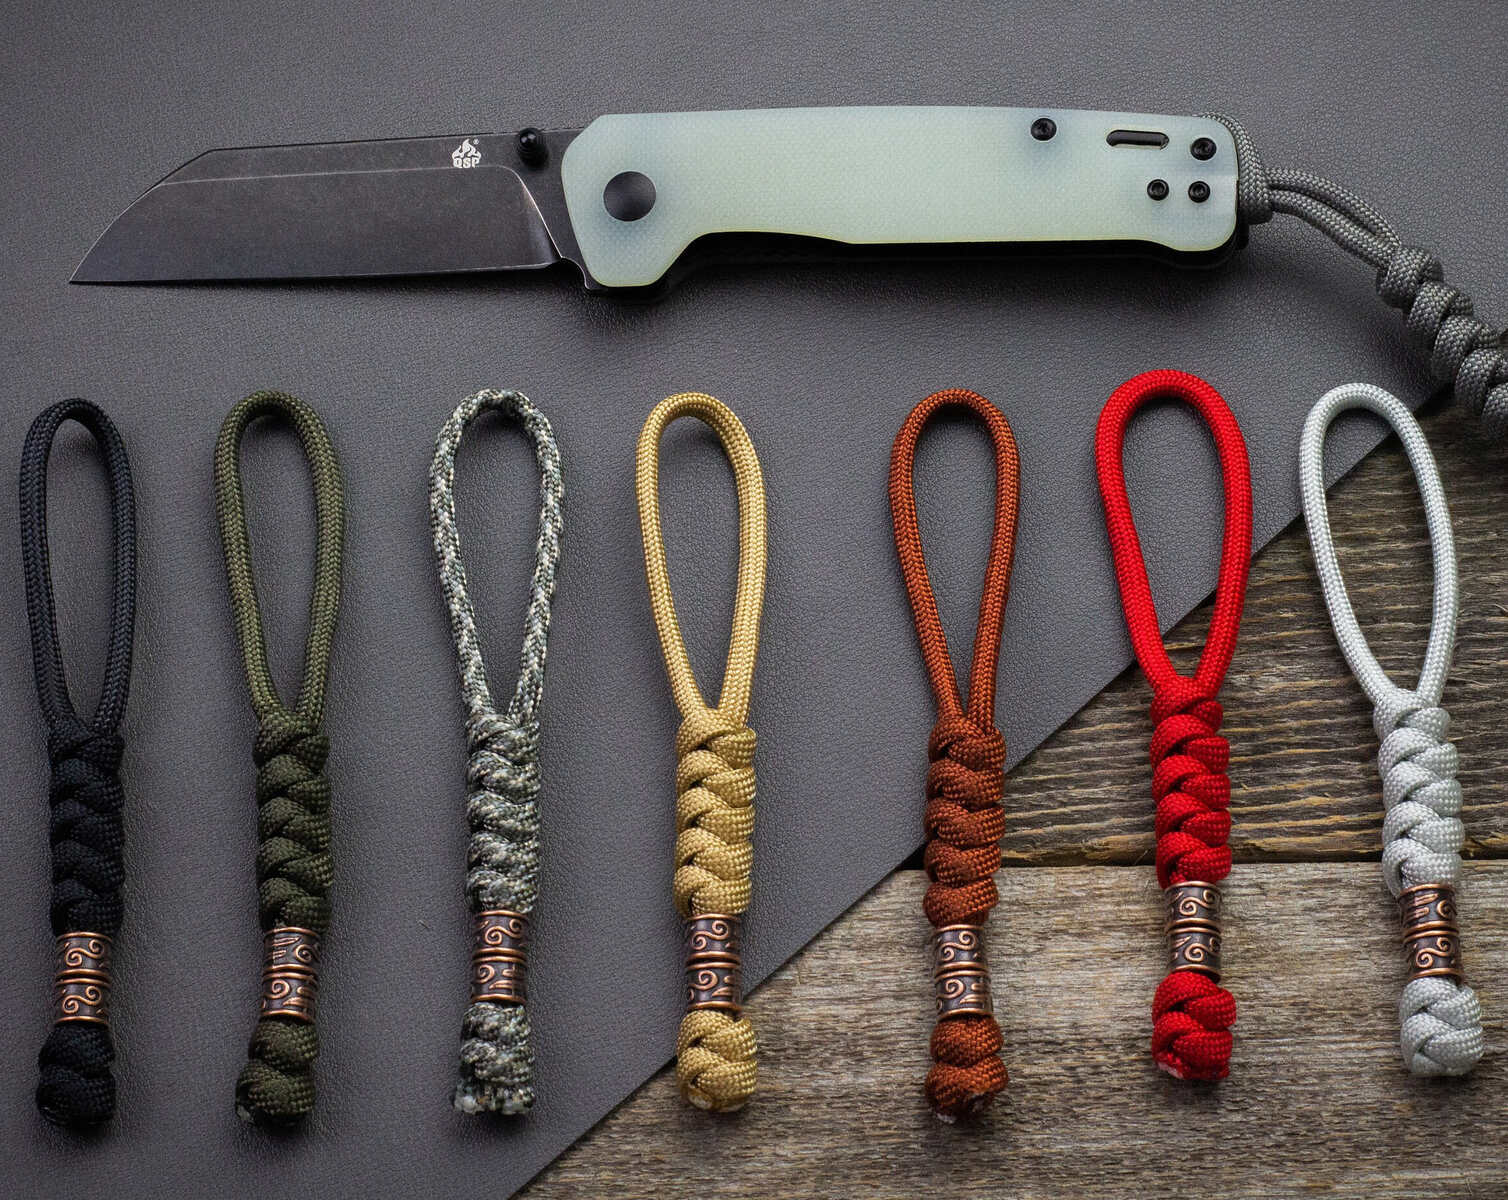 Blade Companion: Tying Lanyards For Knife Accessories